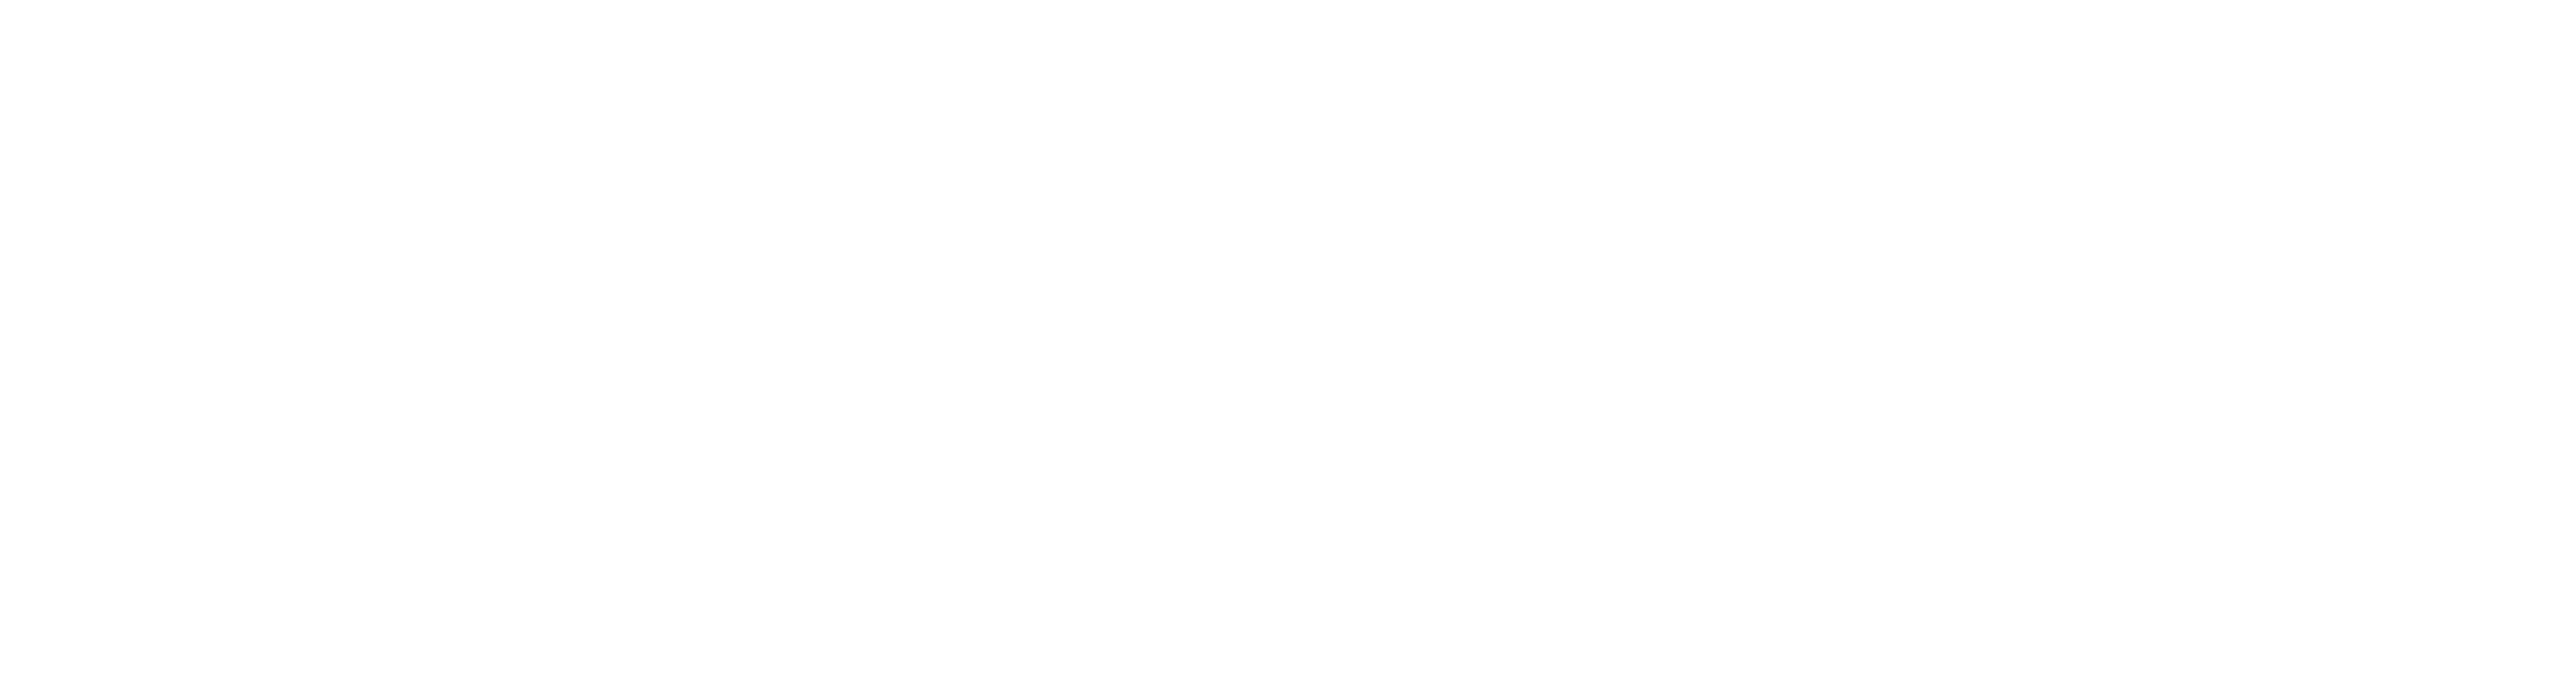 SeaOwl Technology Solutions